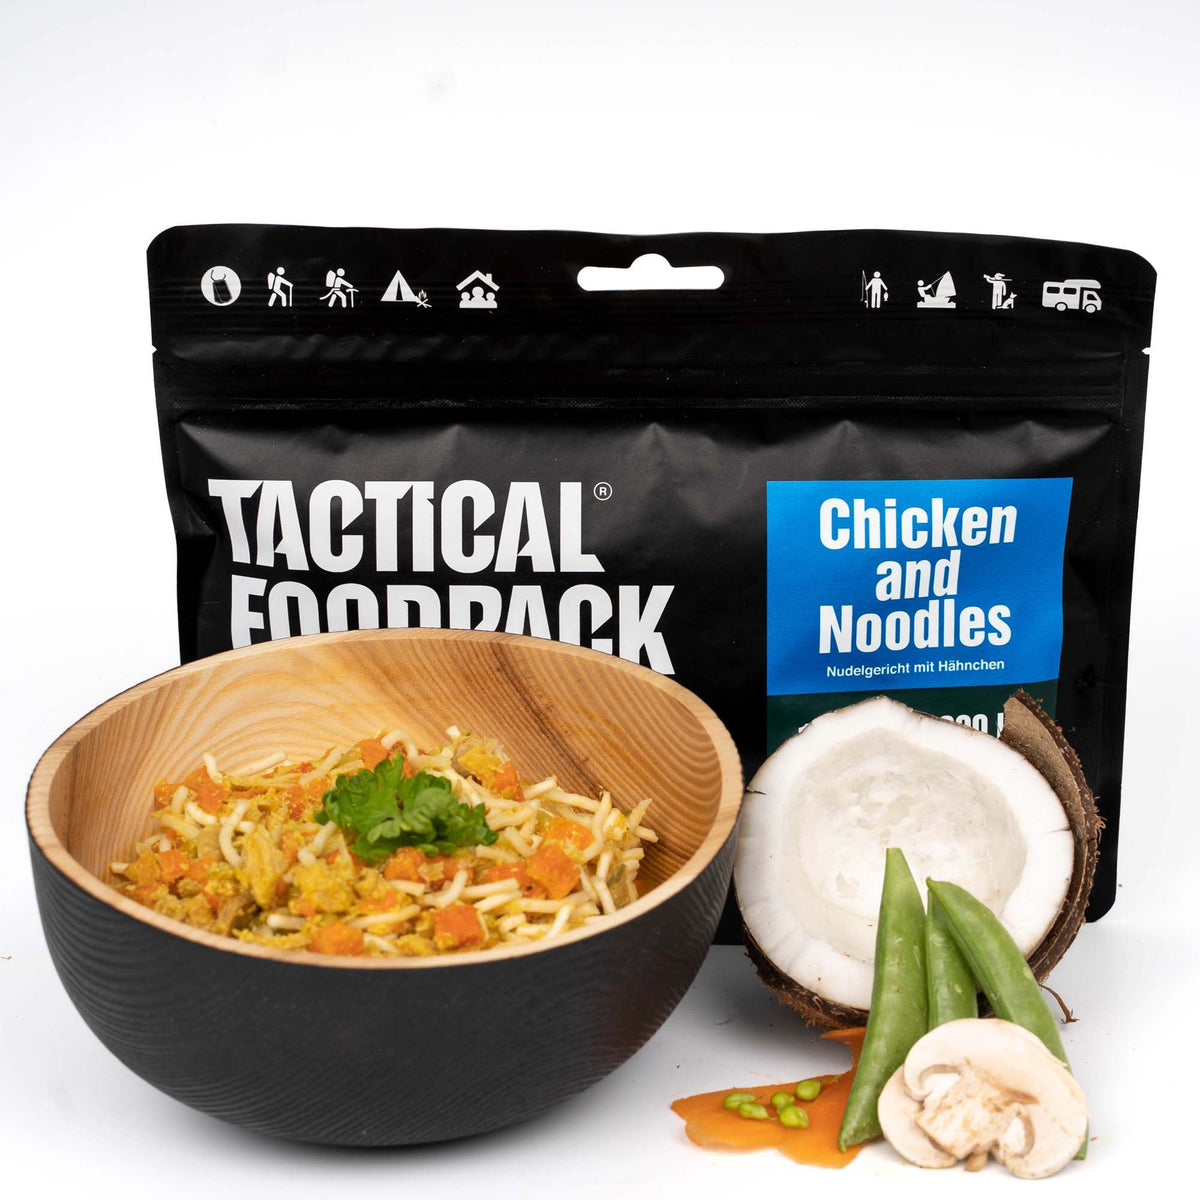 Tactical Foodpack | Chicken and Noodles 115g - Noodles e pollo